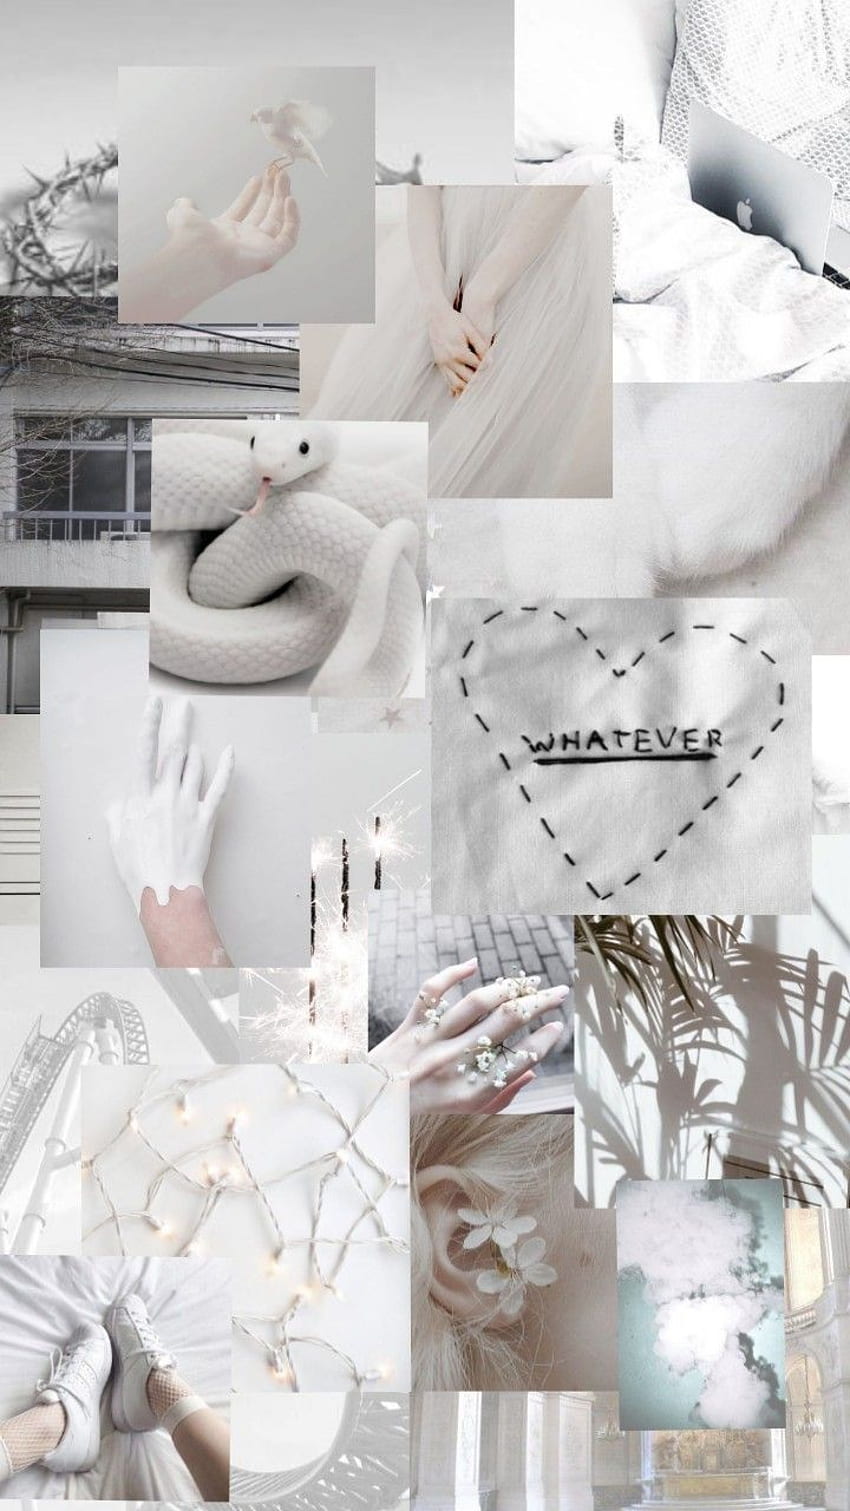 Aesthetic collage of white and grey images - White